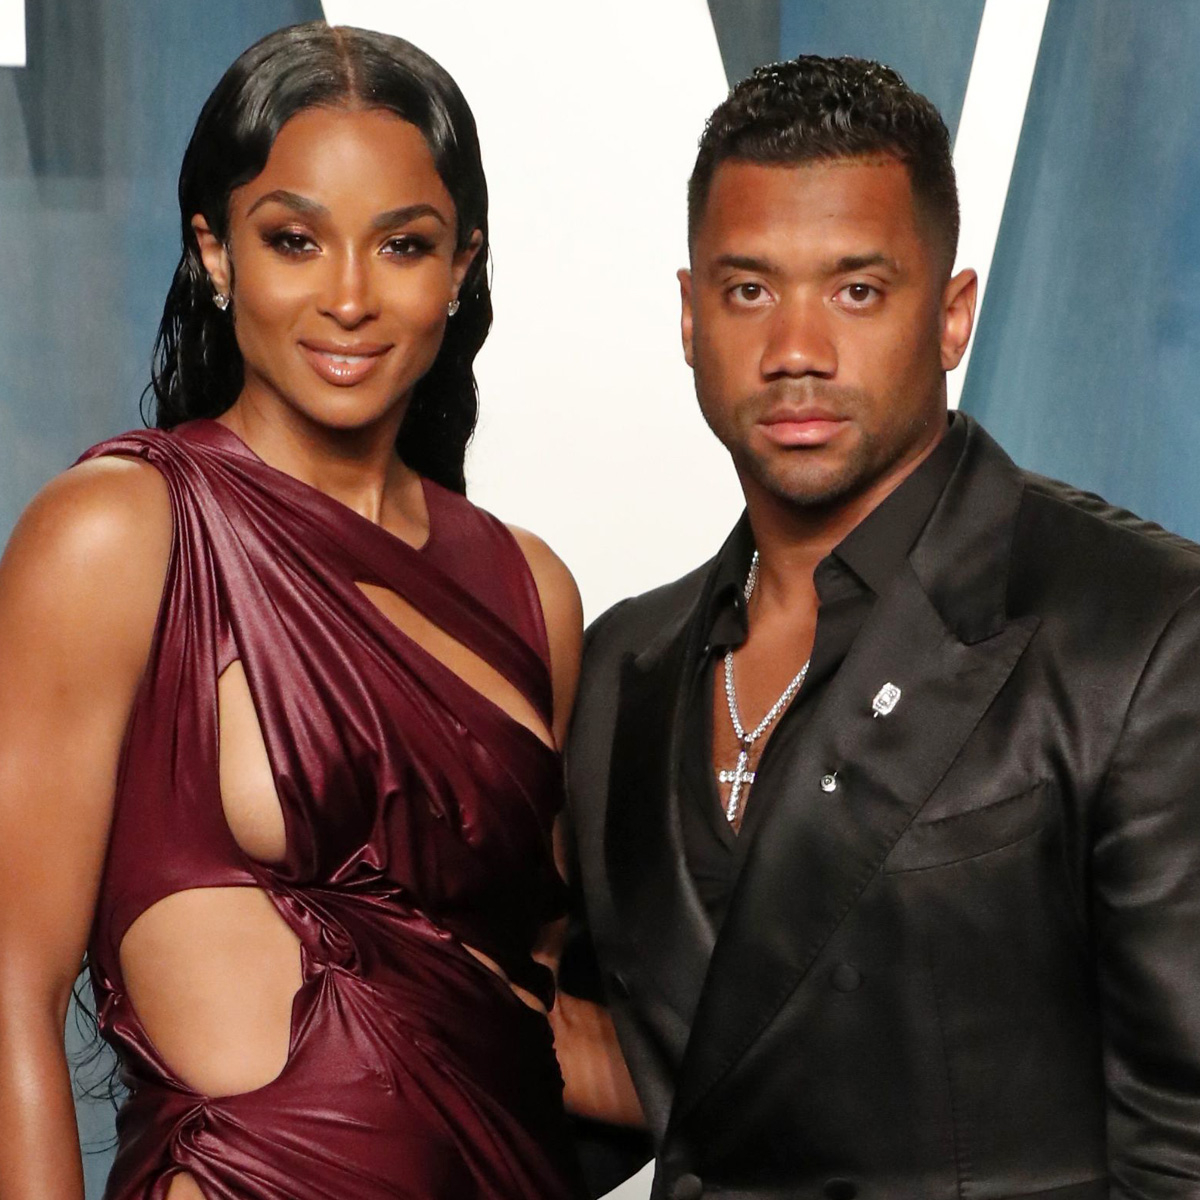 Russell Wilson & Ciara: The Superstar Couple In Pursuit of Perfection